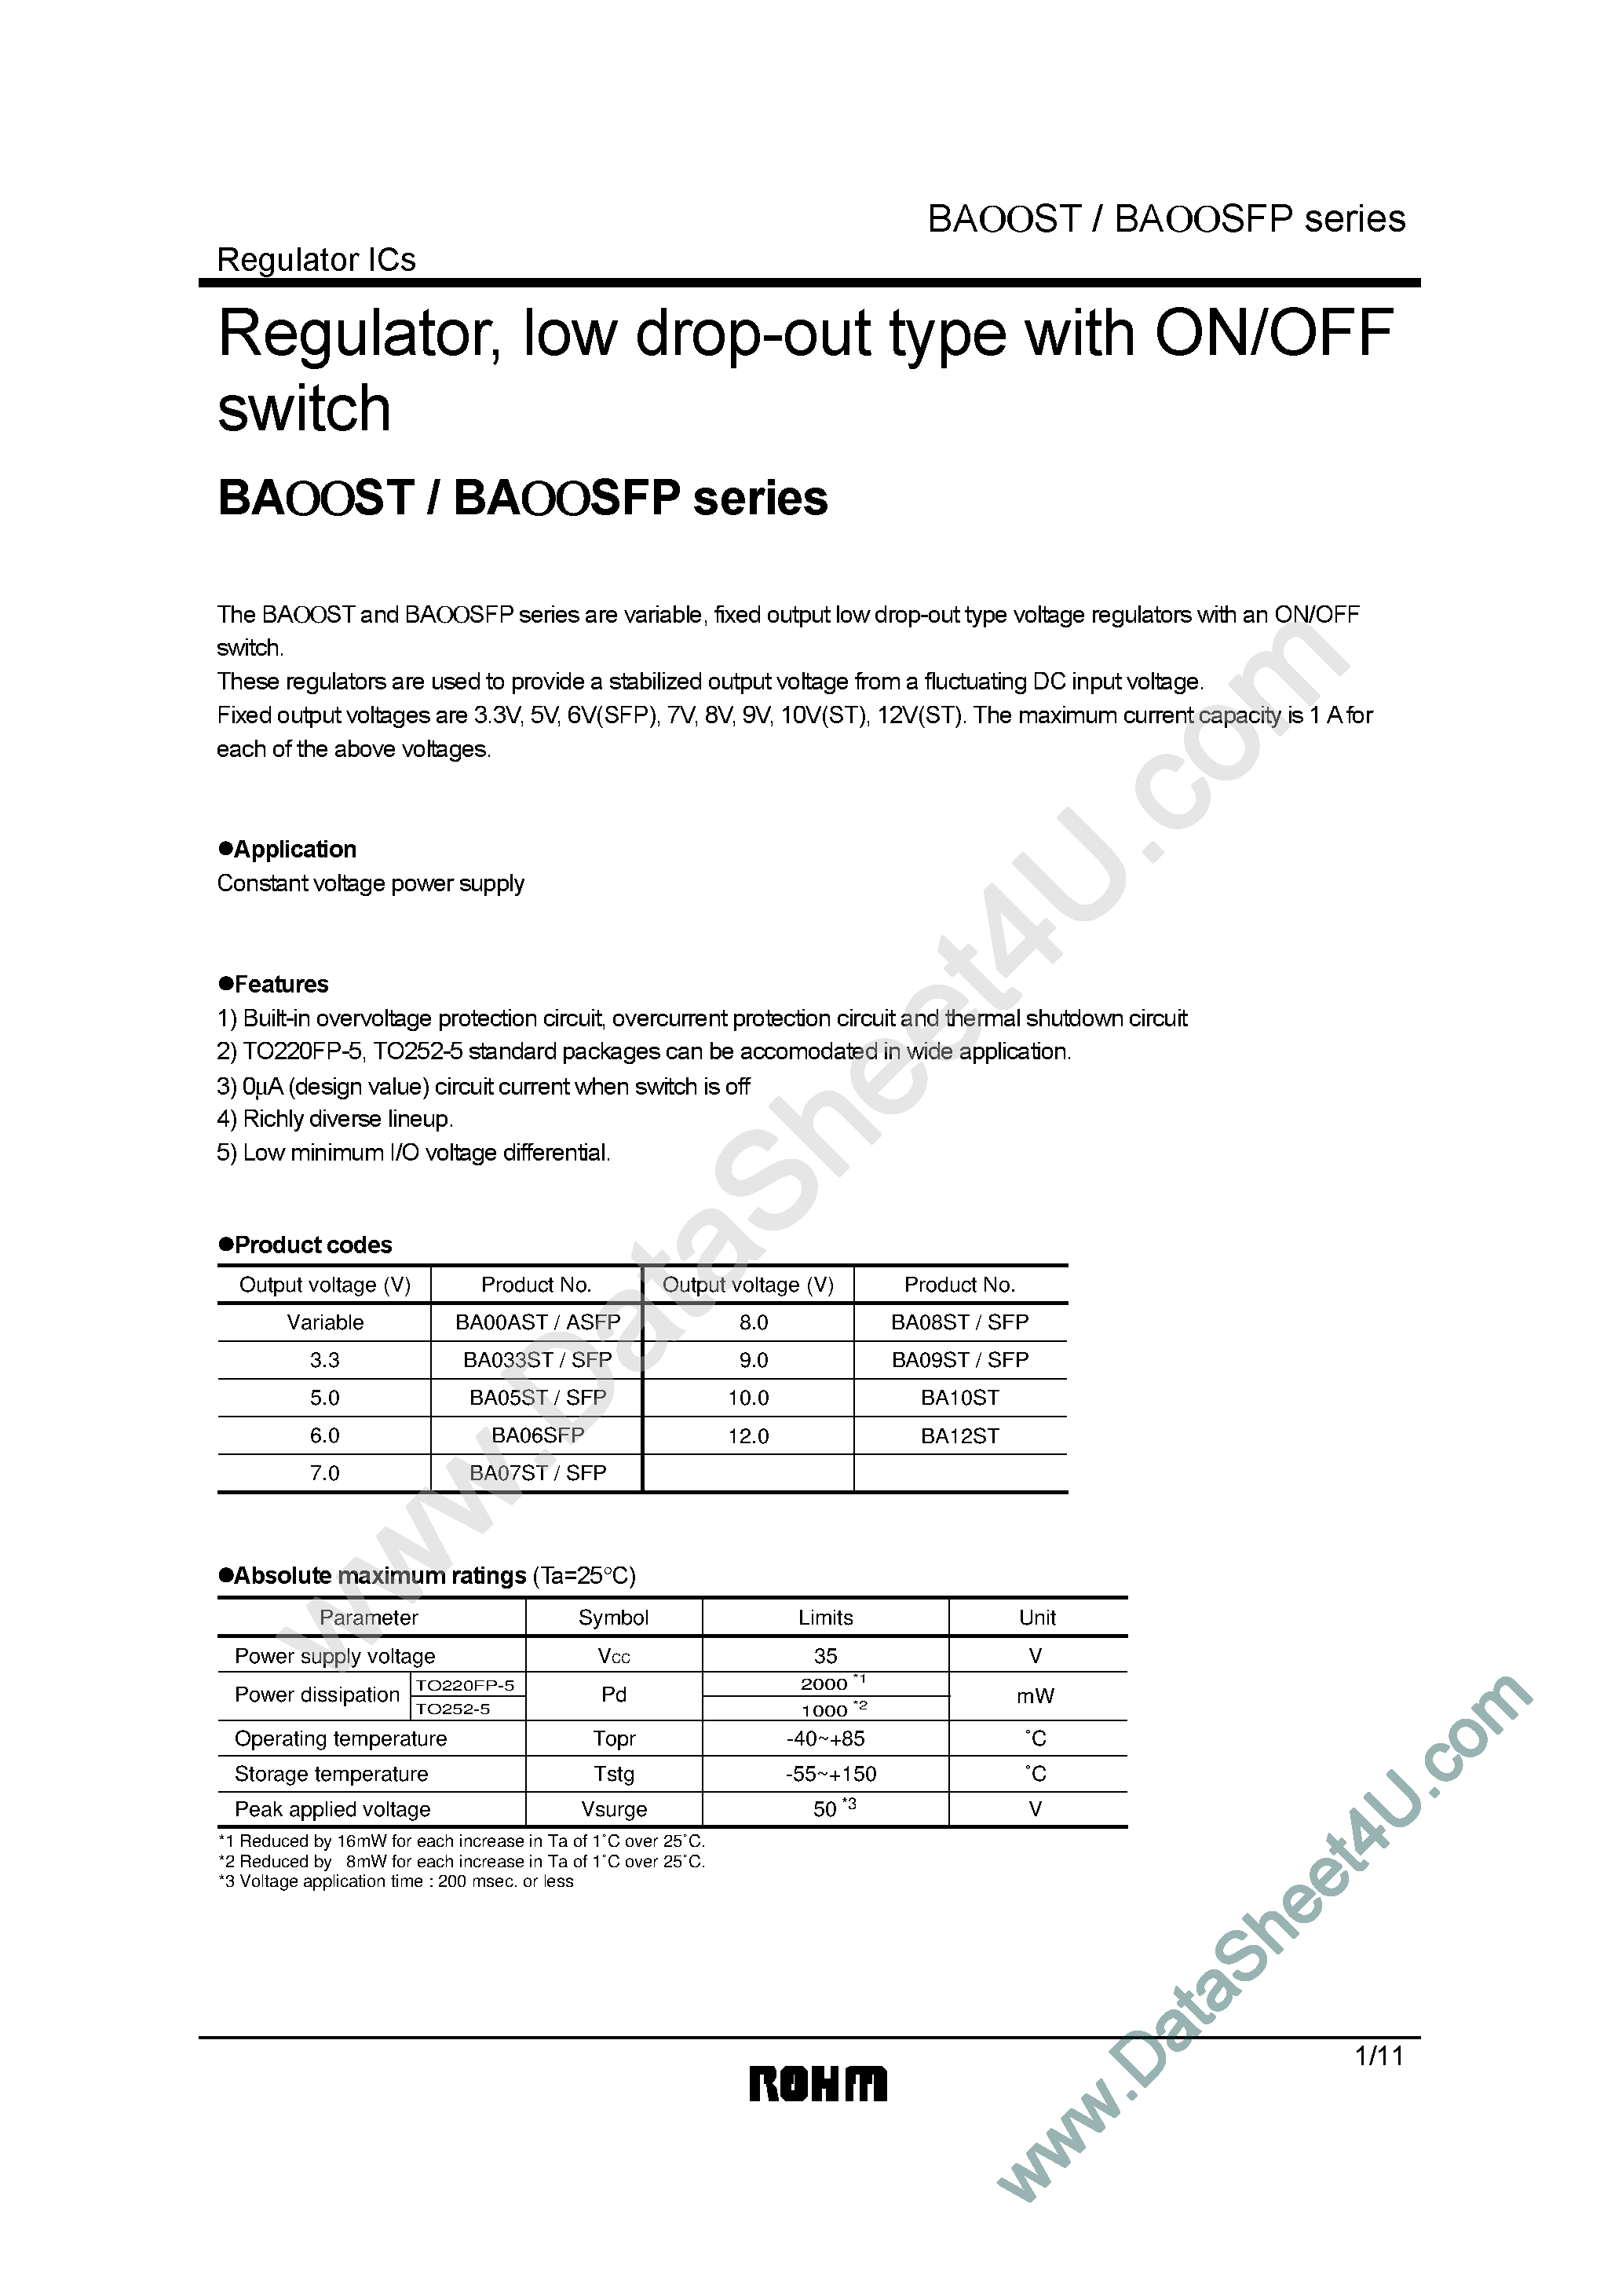 Даташит BA10SFP - (BAxxSFP) Regulator / low drop-out type with ON/OFF switch series страница 1